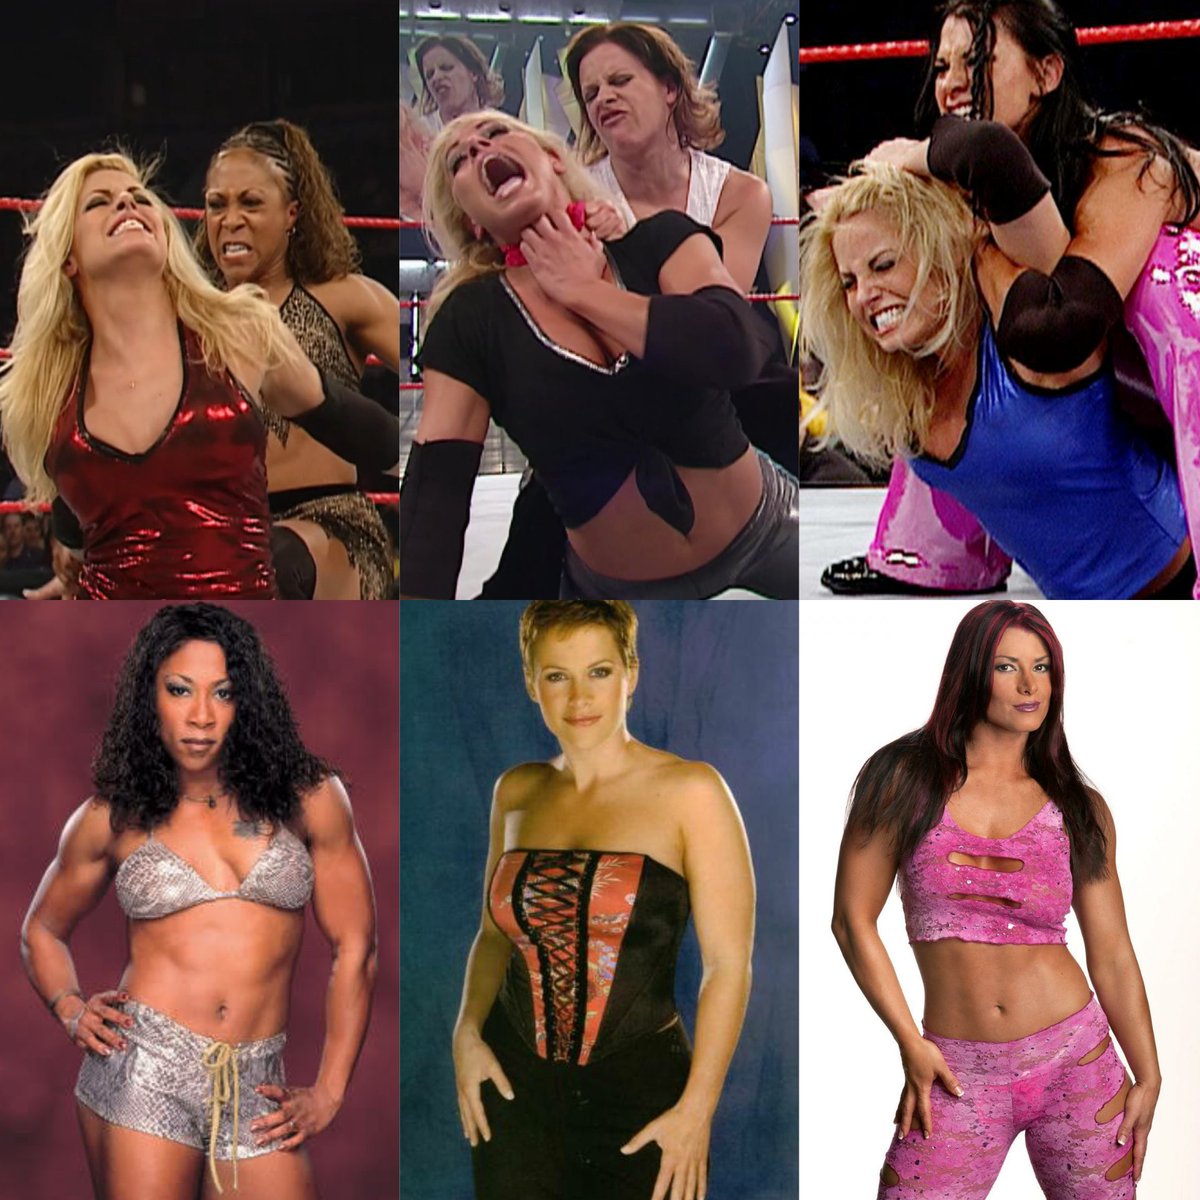 Jazz, Molly Holly and Victoria had a personal vendetta against Trish Stratus they should have formed a 